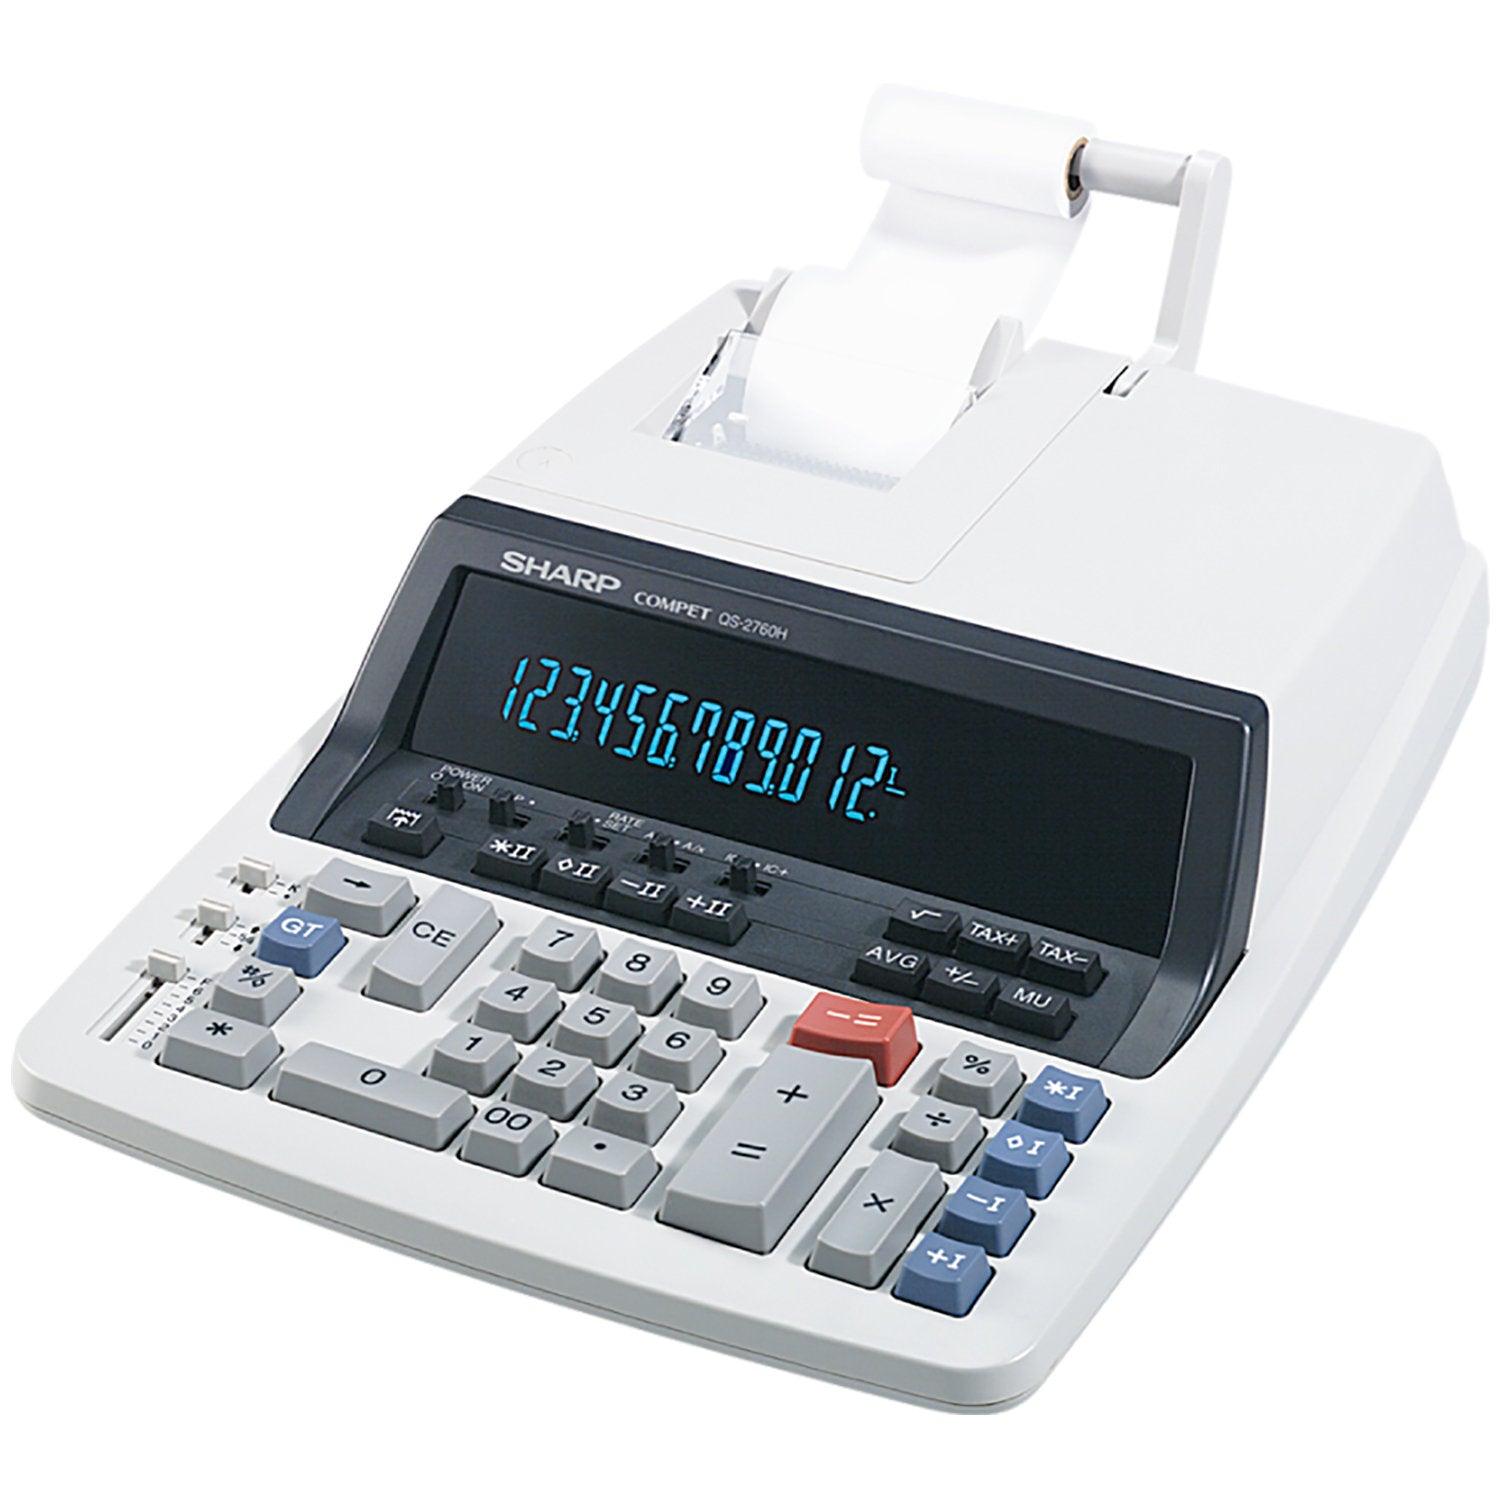 Sharp QS2760H - 12 Digit Professional Heavy Duty Commercial Printing Calculator - Underwood Distributing Co.